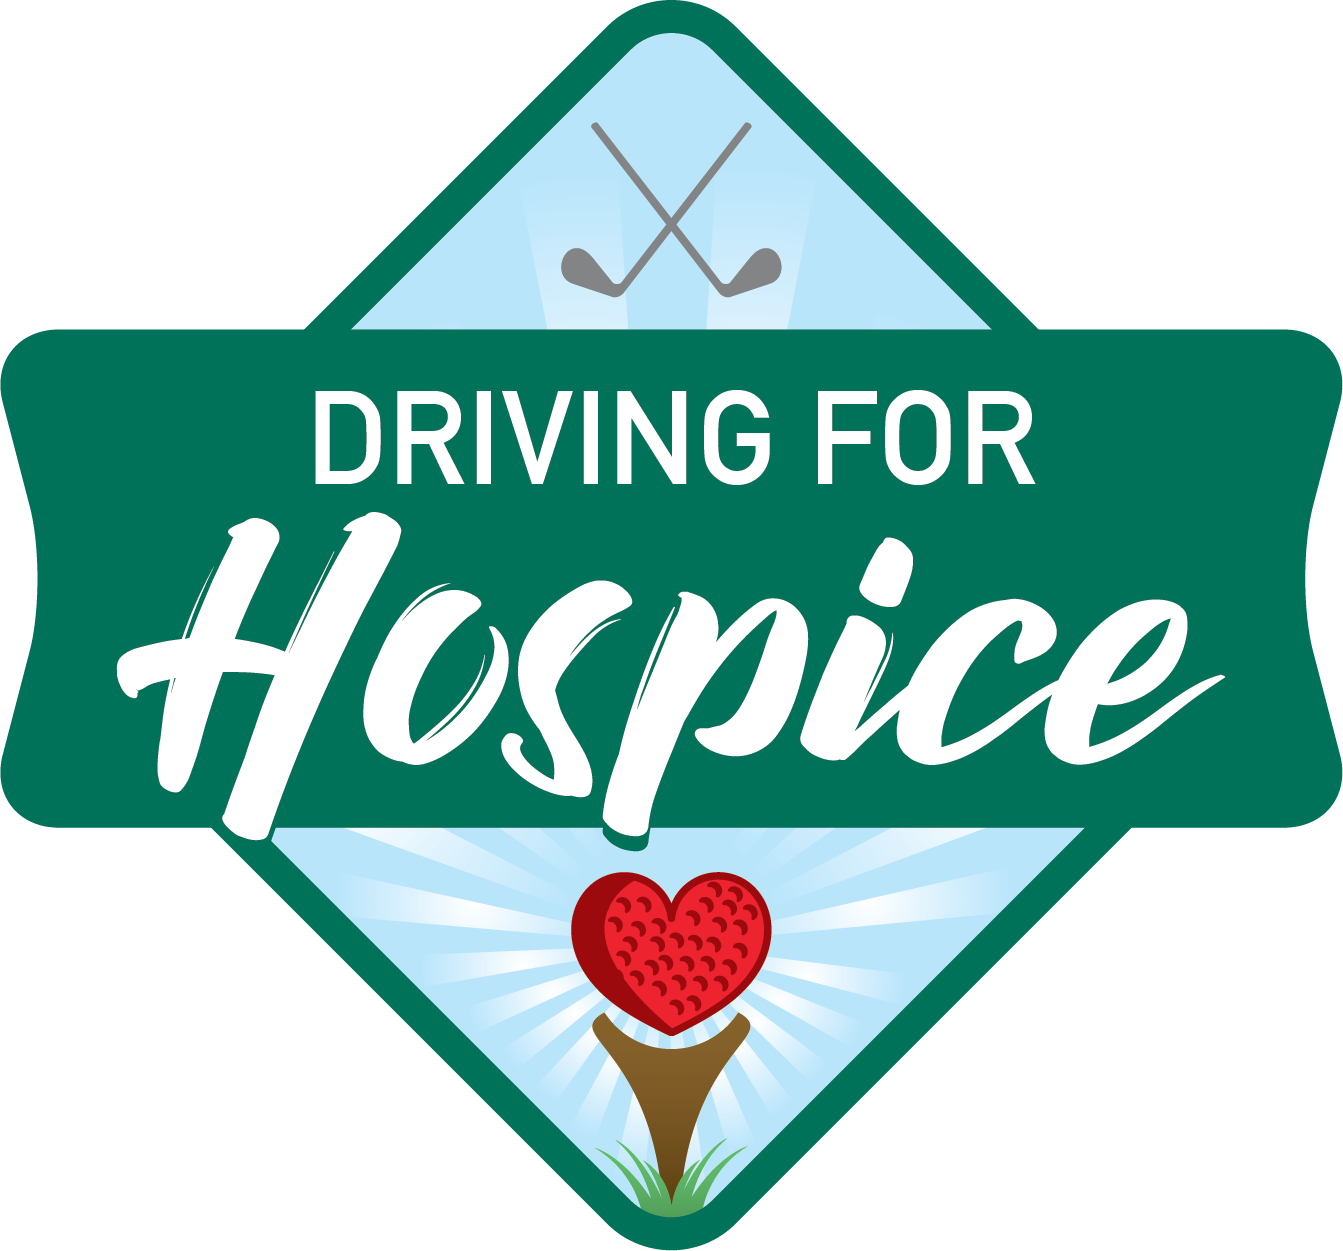 DrivingForHospice.png